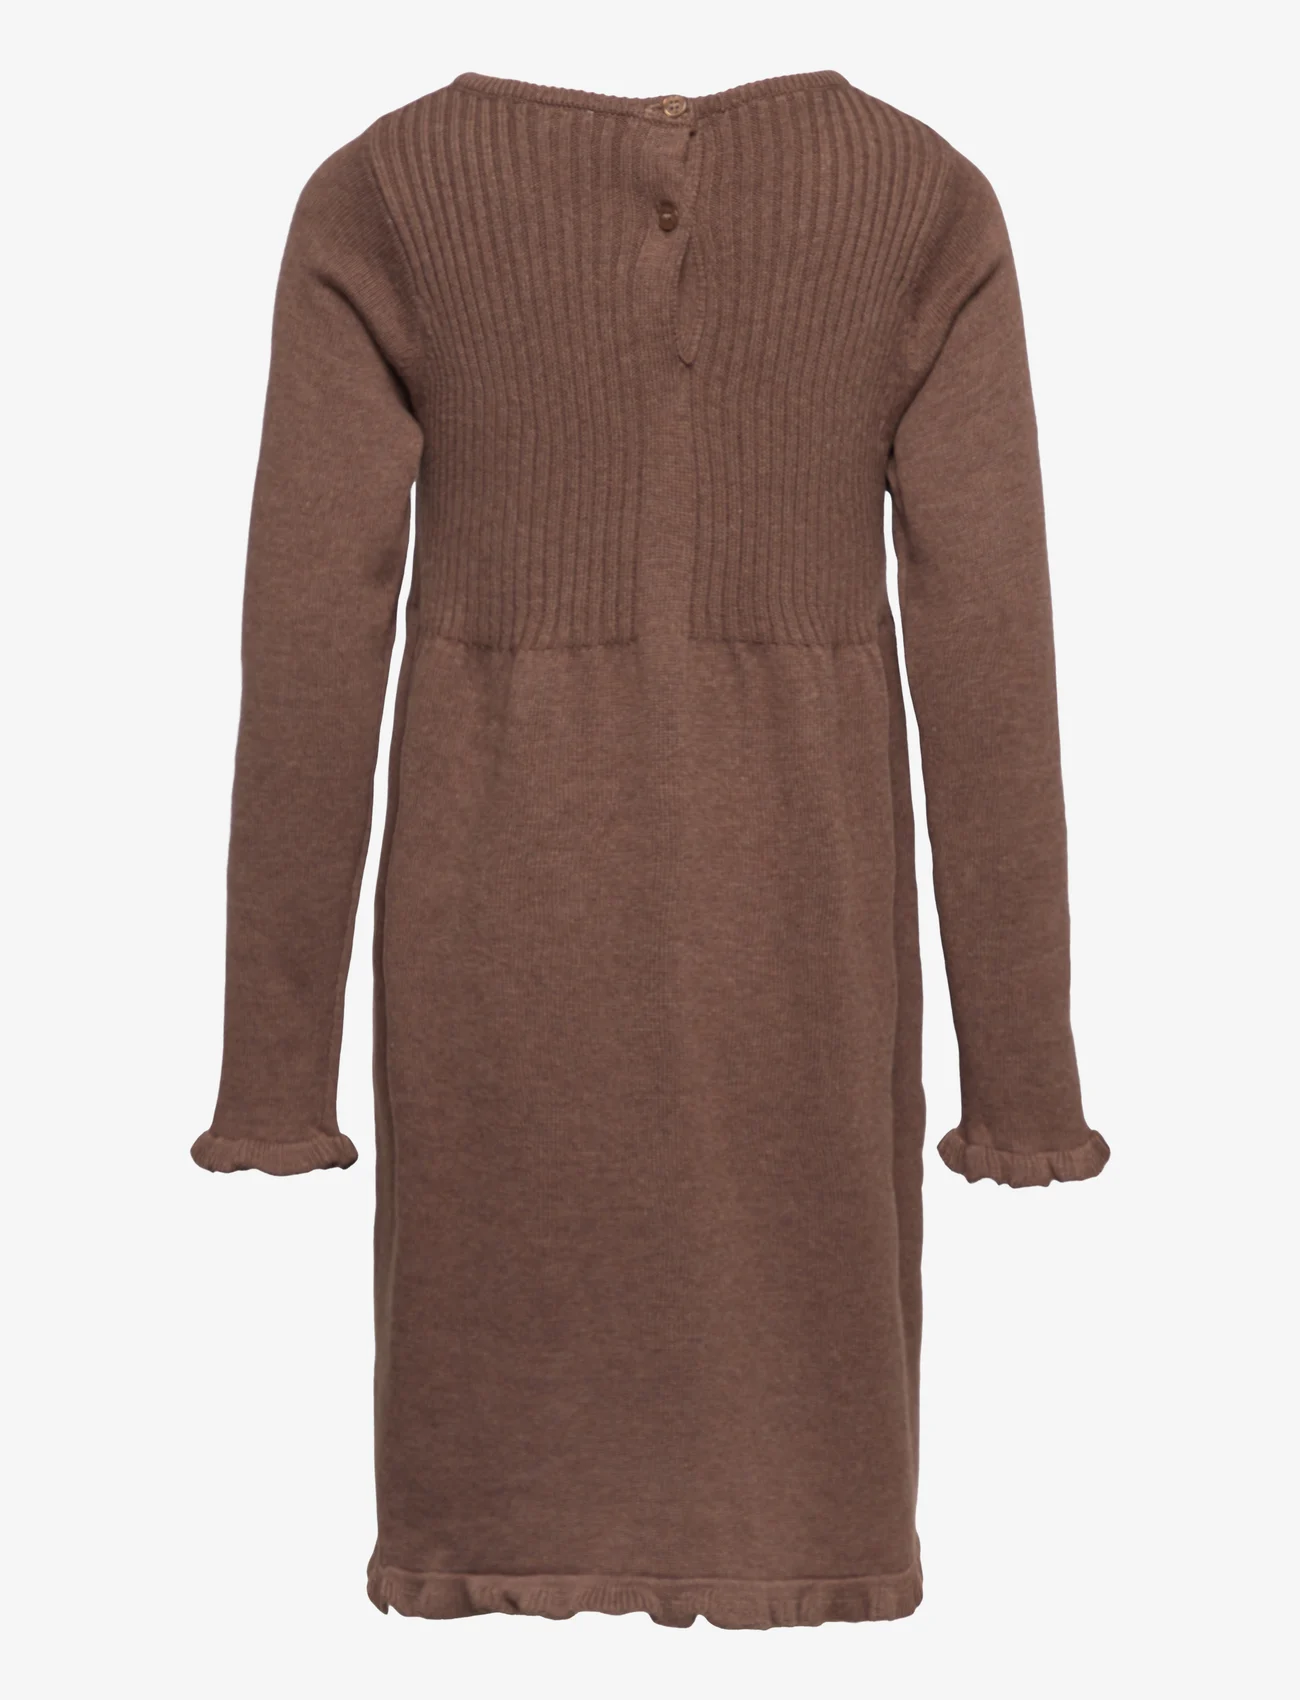 Hust & Claire - Daisi - Dress - long-sleeved casual dresses - toffee melange - 1